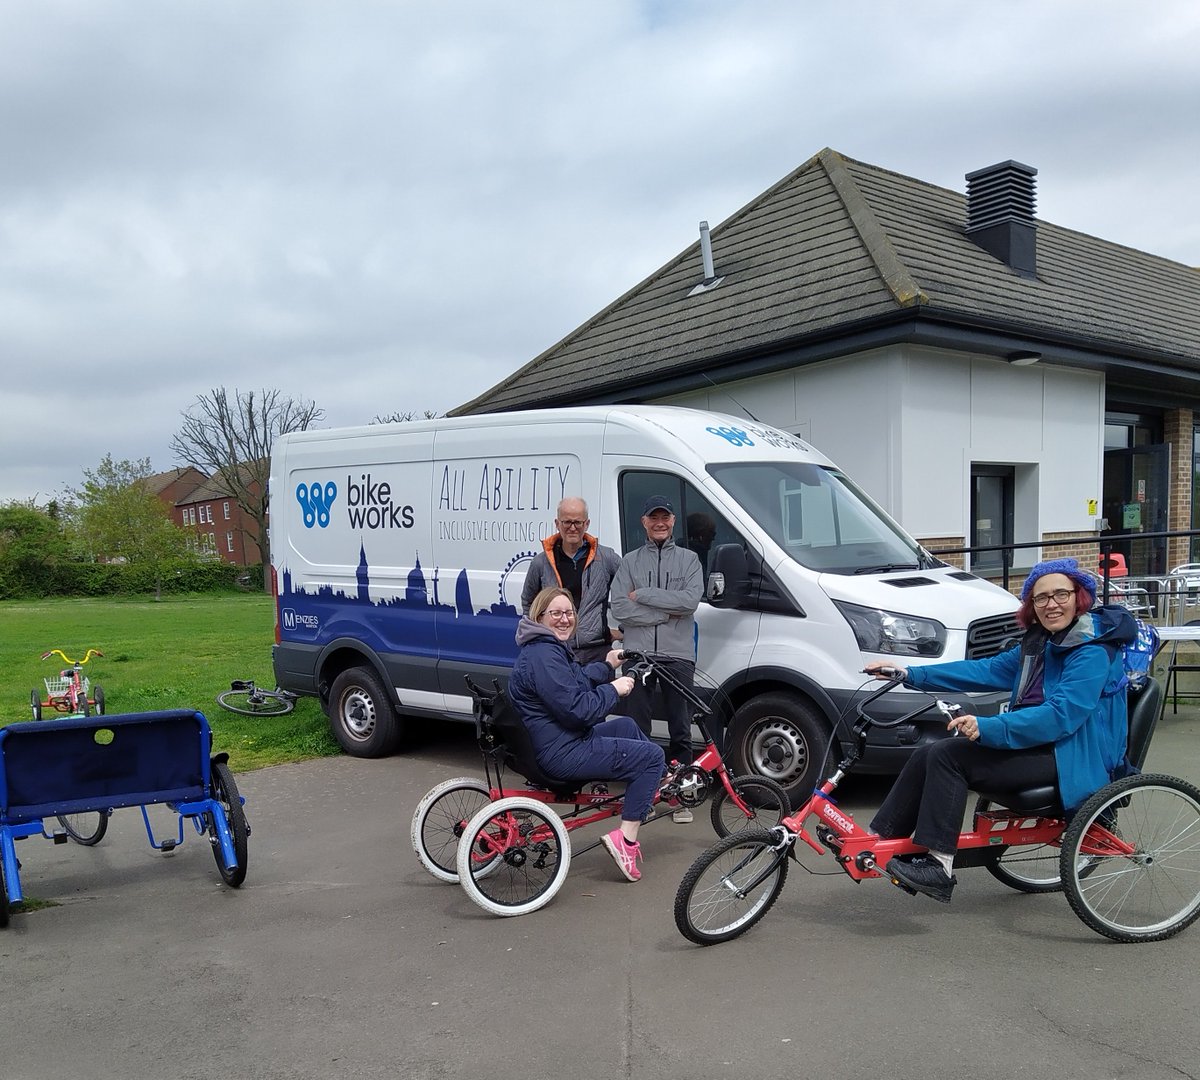 Try out one of our All Ability Cycling sessions in Kneller Gardens TOMORROW from 10.30am-12.30pm! These sessions use adapted bikes to empower people with impairments to enjoy cycling in a safe environment 🚲 To book, contact Frances at outdoor.learning@outlook.com